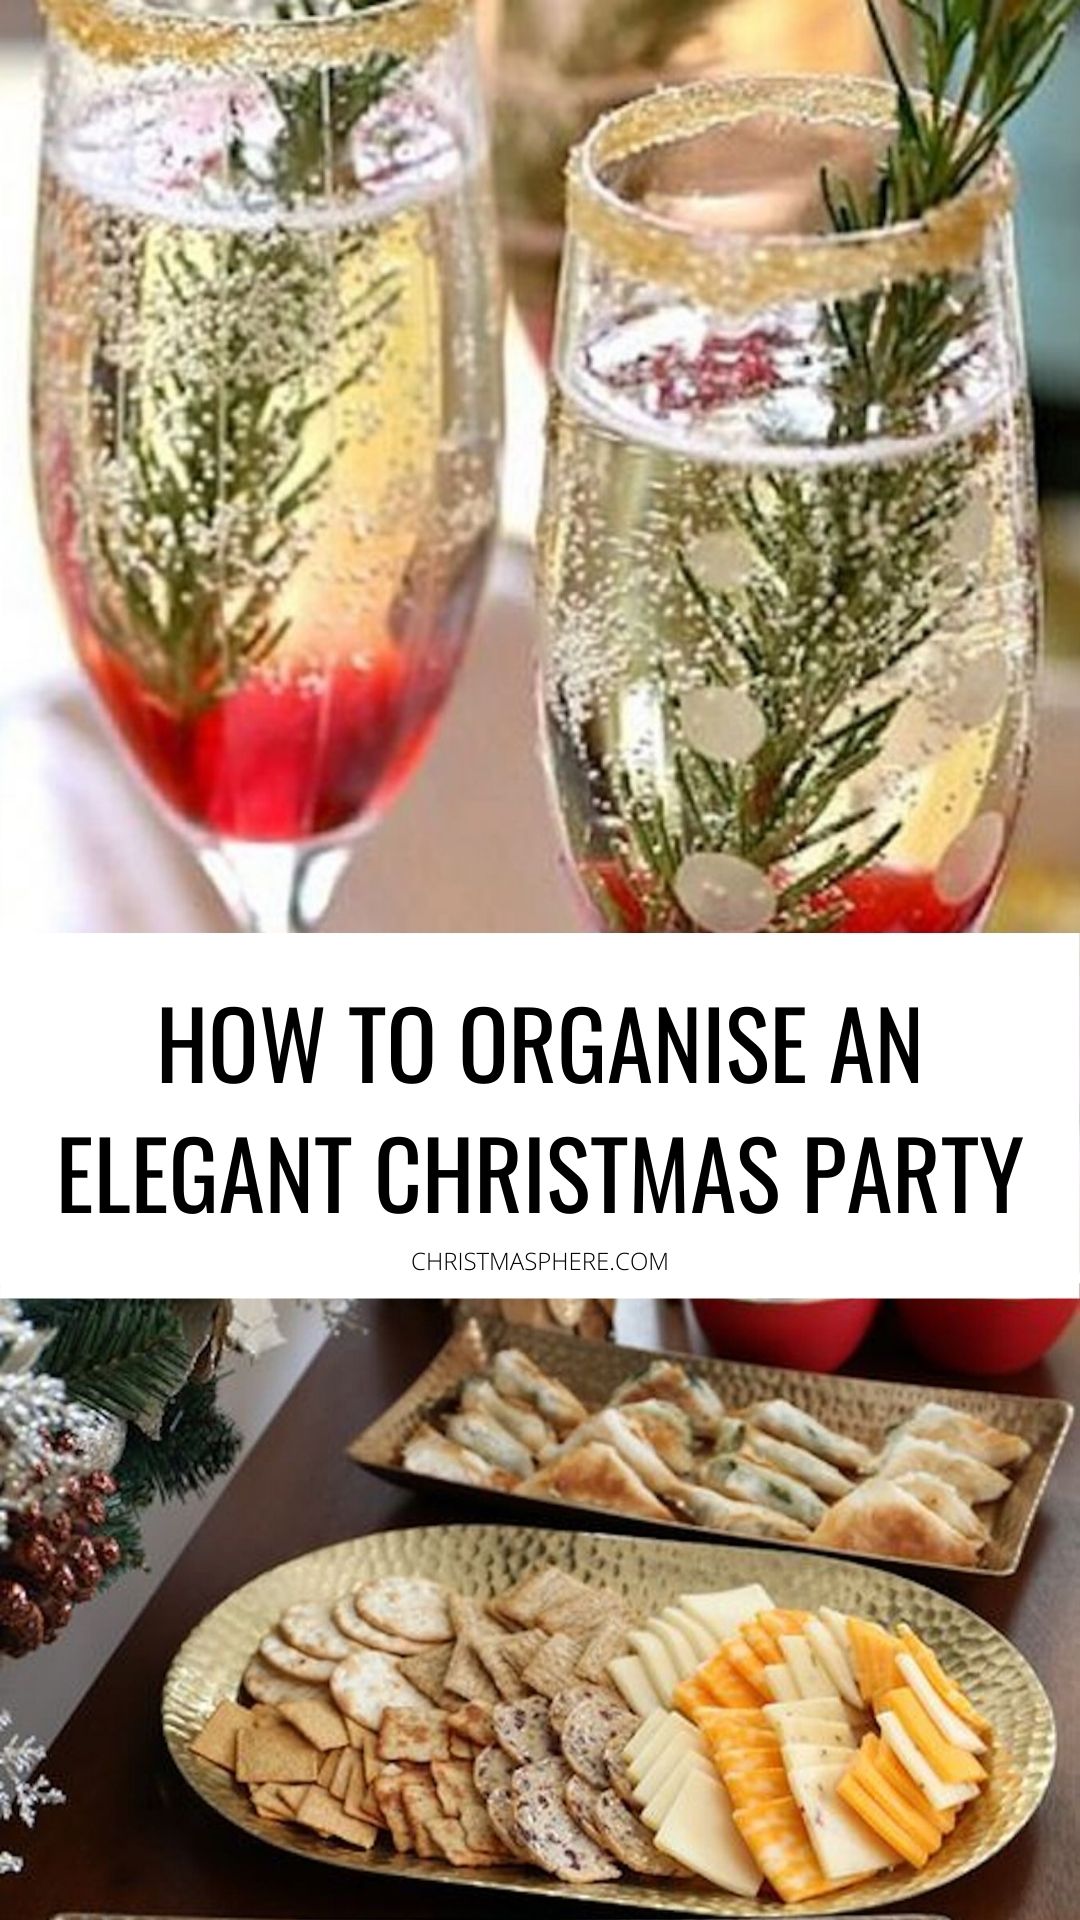 How to organise an elegant Christmas party